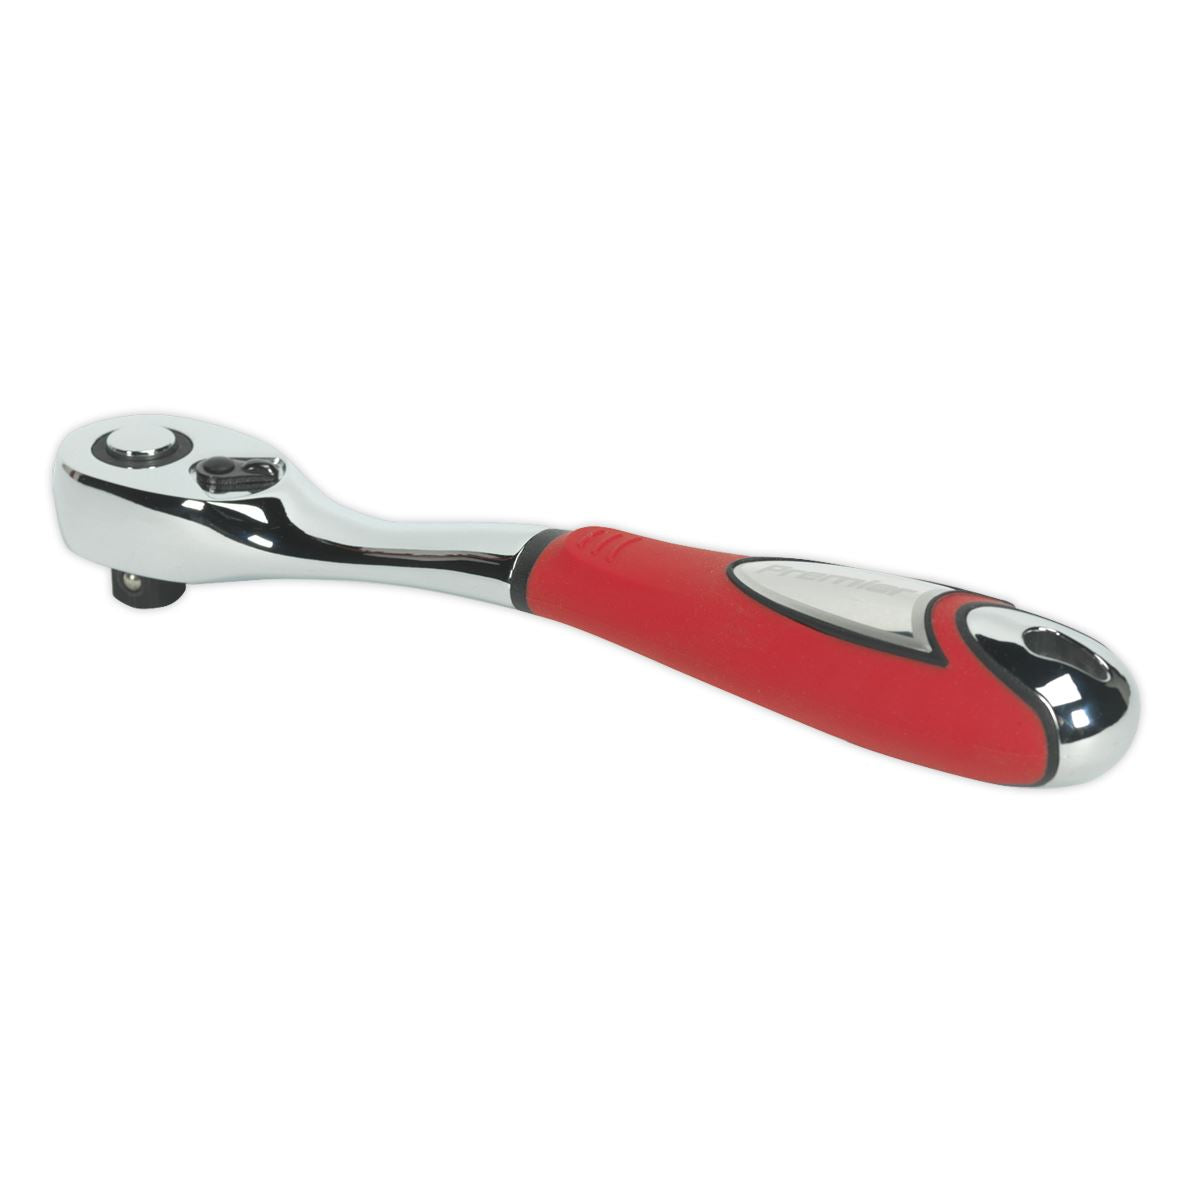 Sealey Premier Ratchet Wrench Offset 1/2"Sq Drive